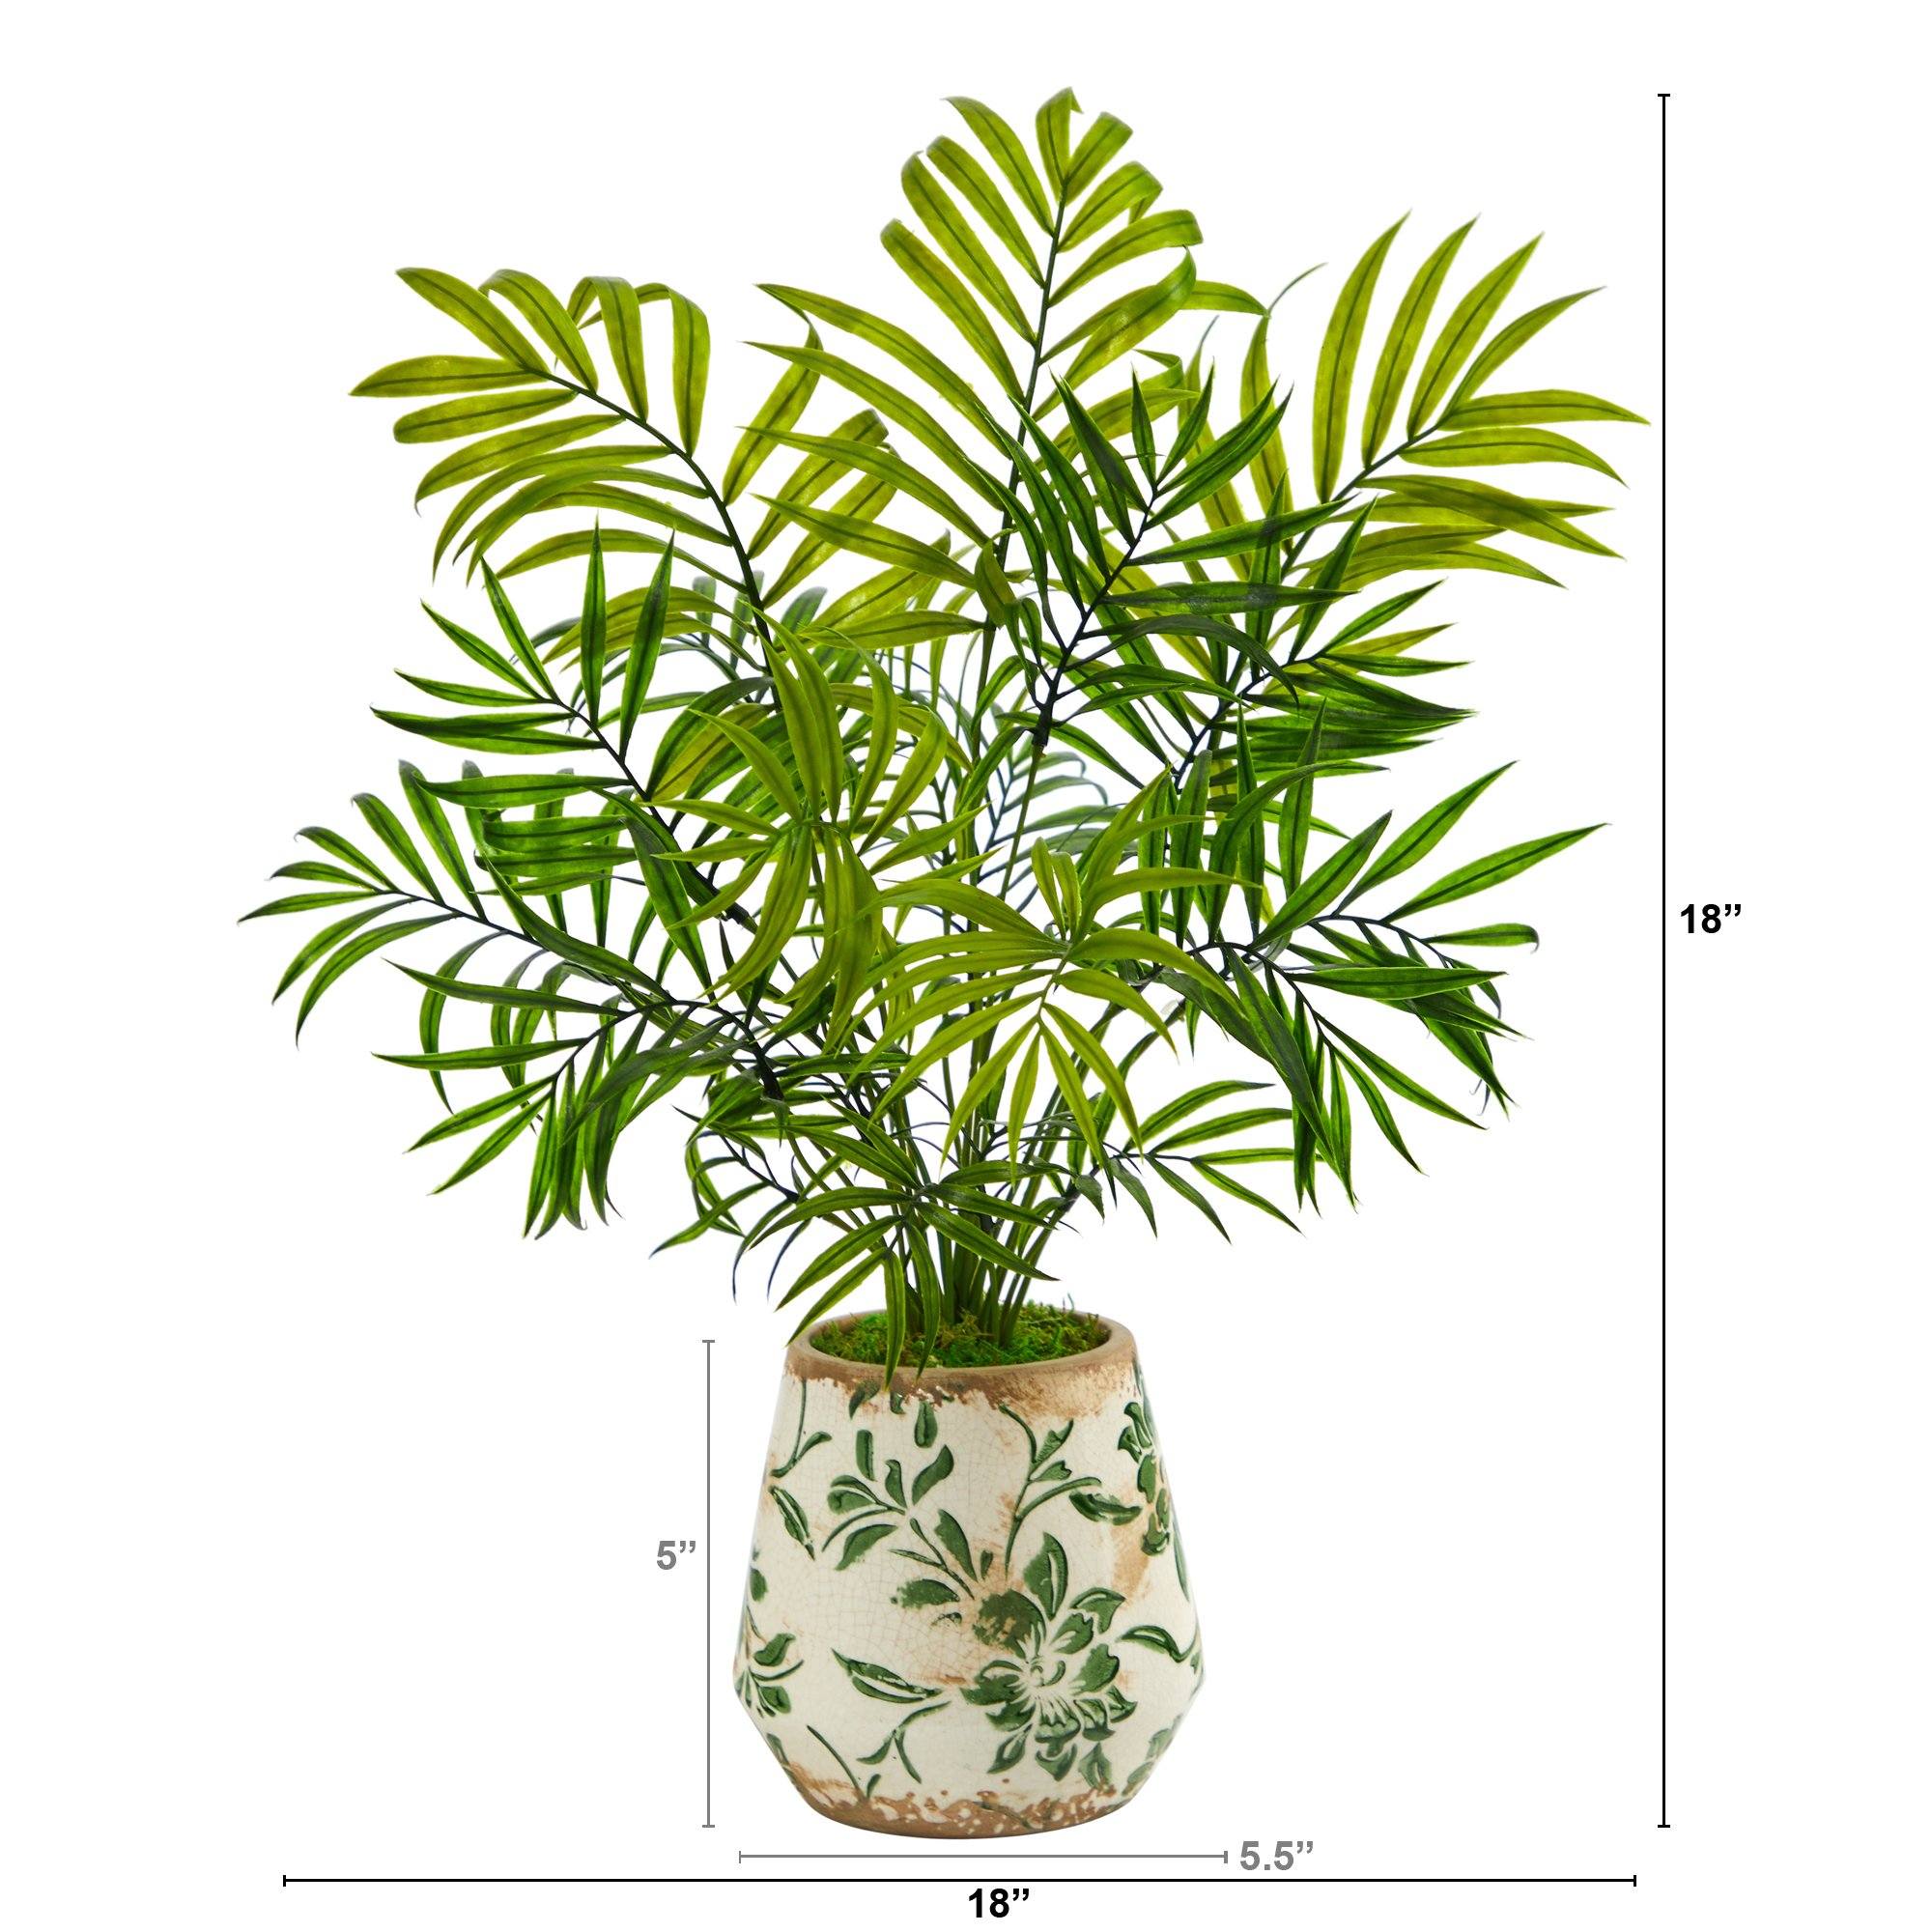 Artificial Arrangement - 18” Mini Areca Palm  in Floral Vase by Nearly Natural